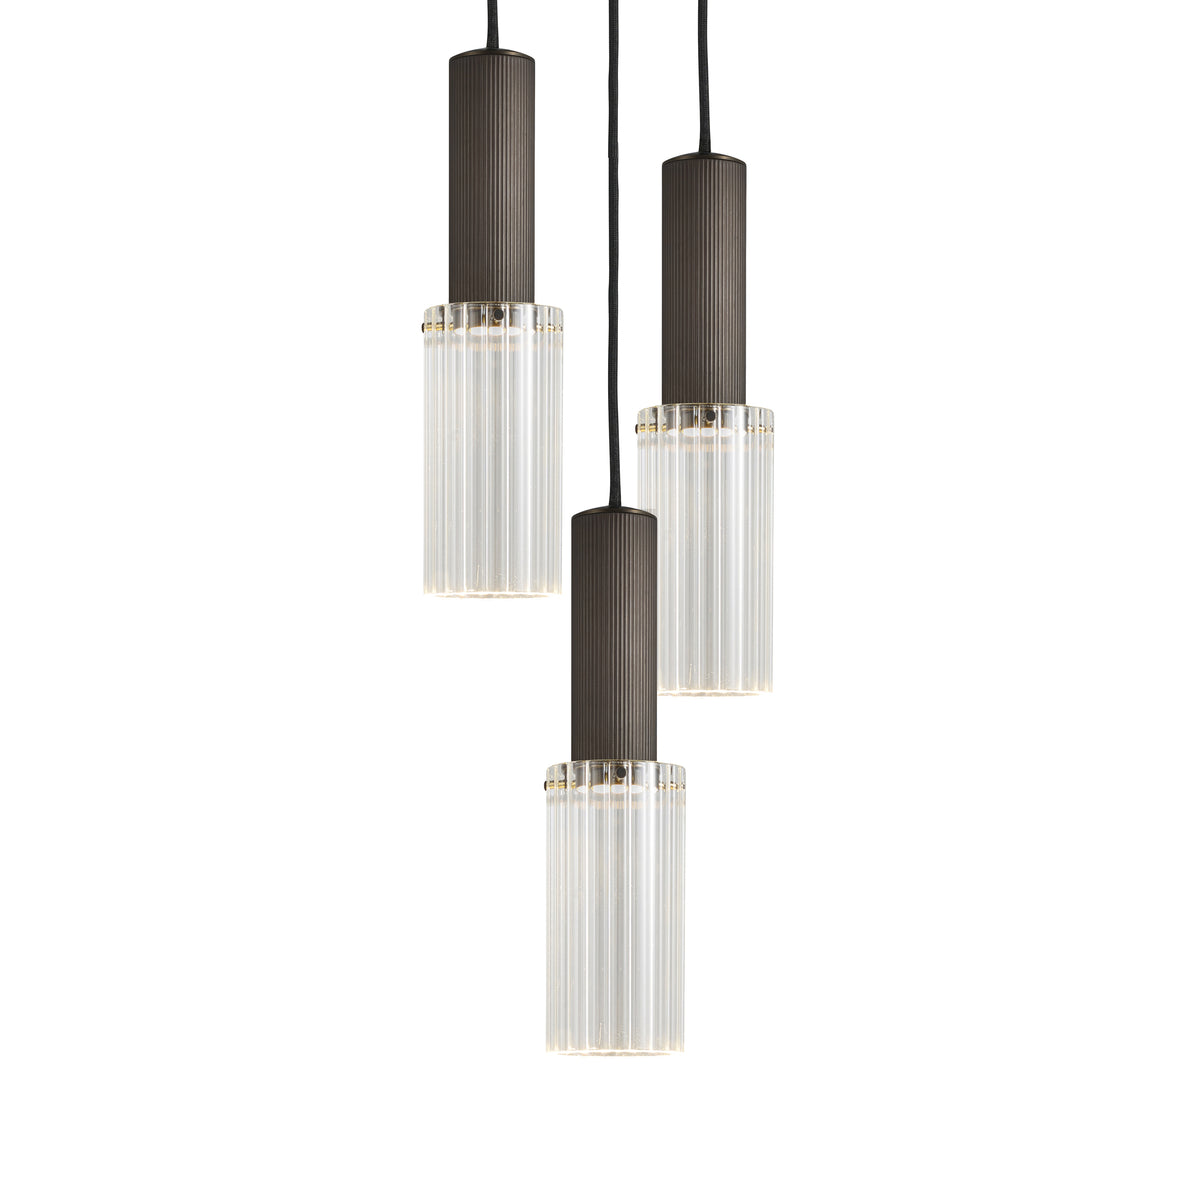 Triple grouping of the Flume 80 Pendant Light in bronze with clear reeded glass